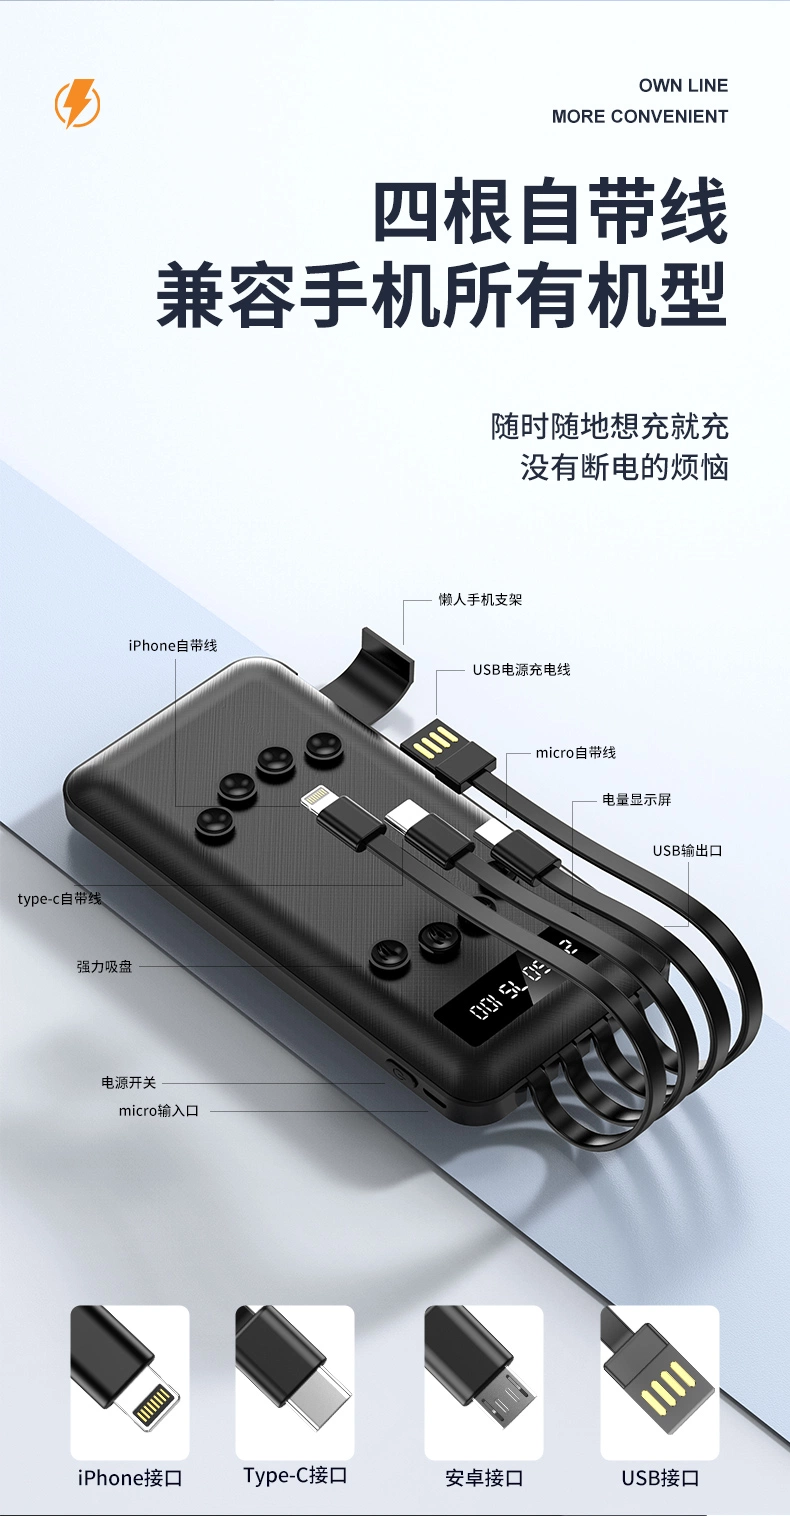 Portable Charger, Power Bank 10000mAh, Comes with a Four Wire Charging Power Supply for Fast Charging